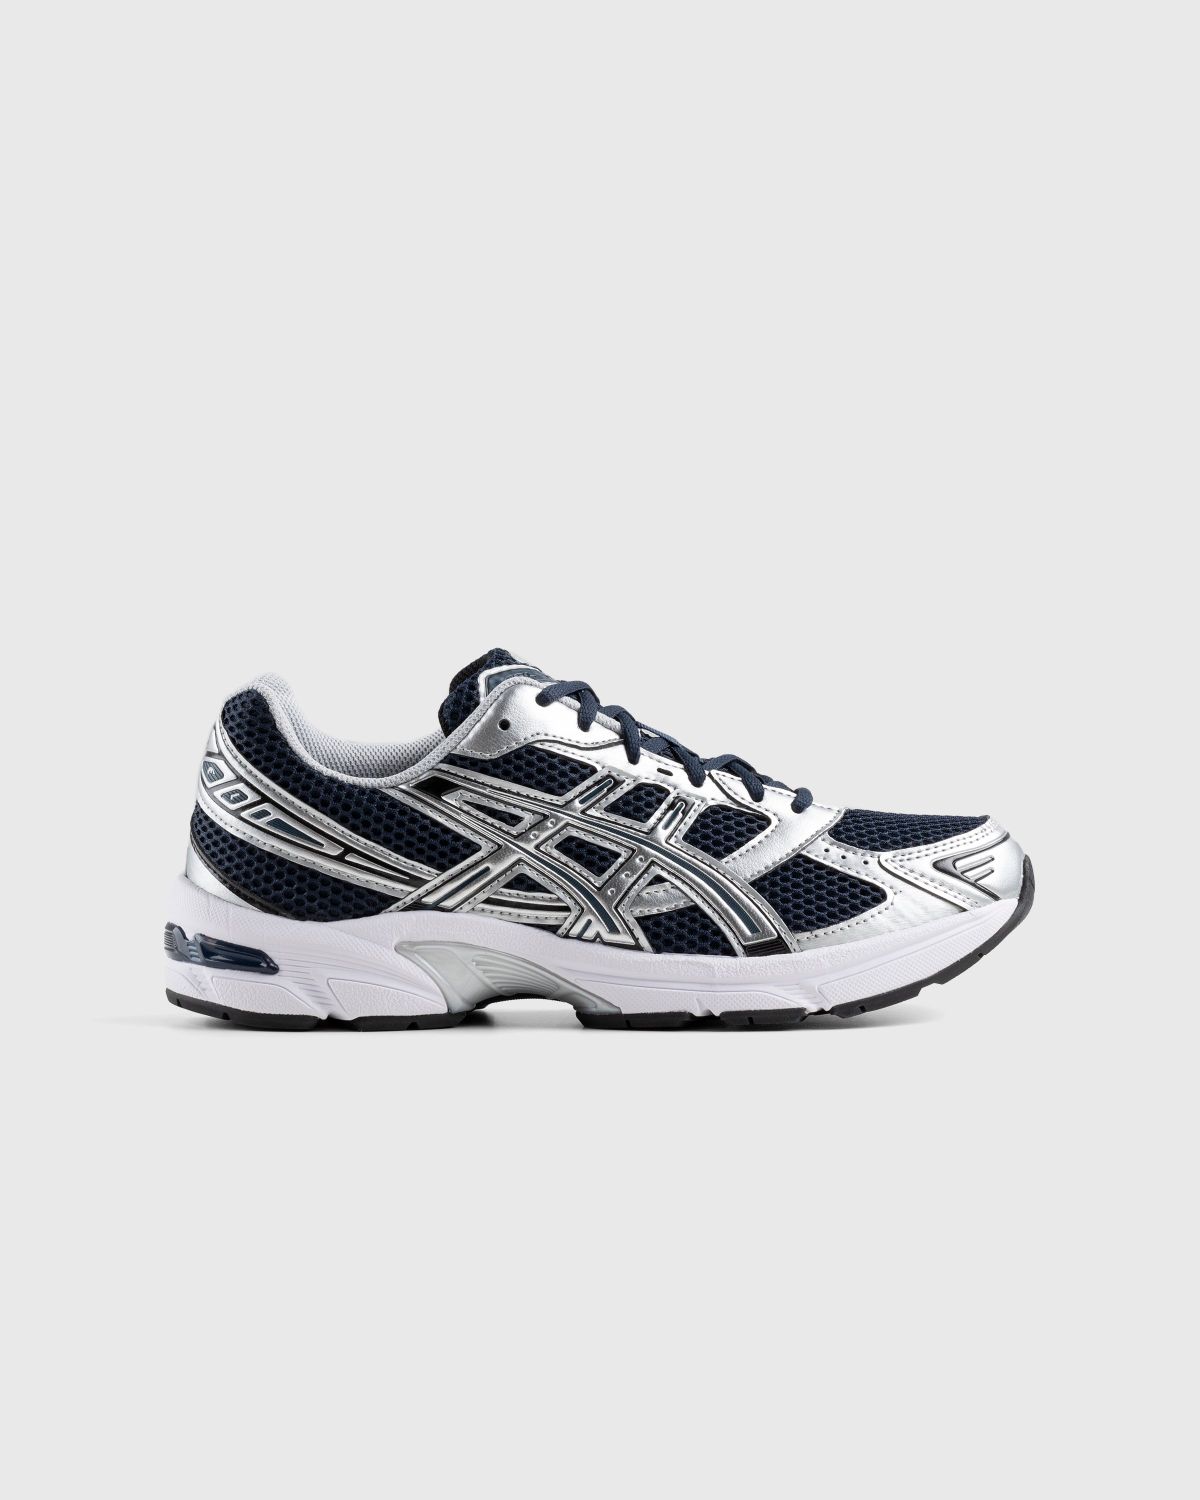 asics – GEL-1130 French Blue/Pure Silver - Low Top Sneakers - Blue - Image 1